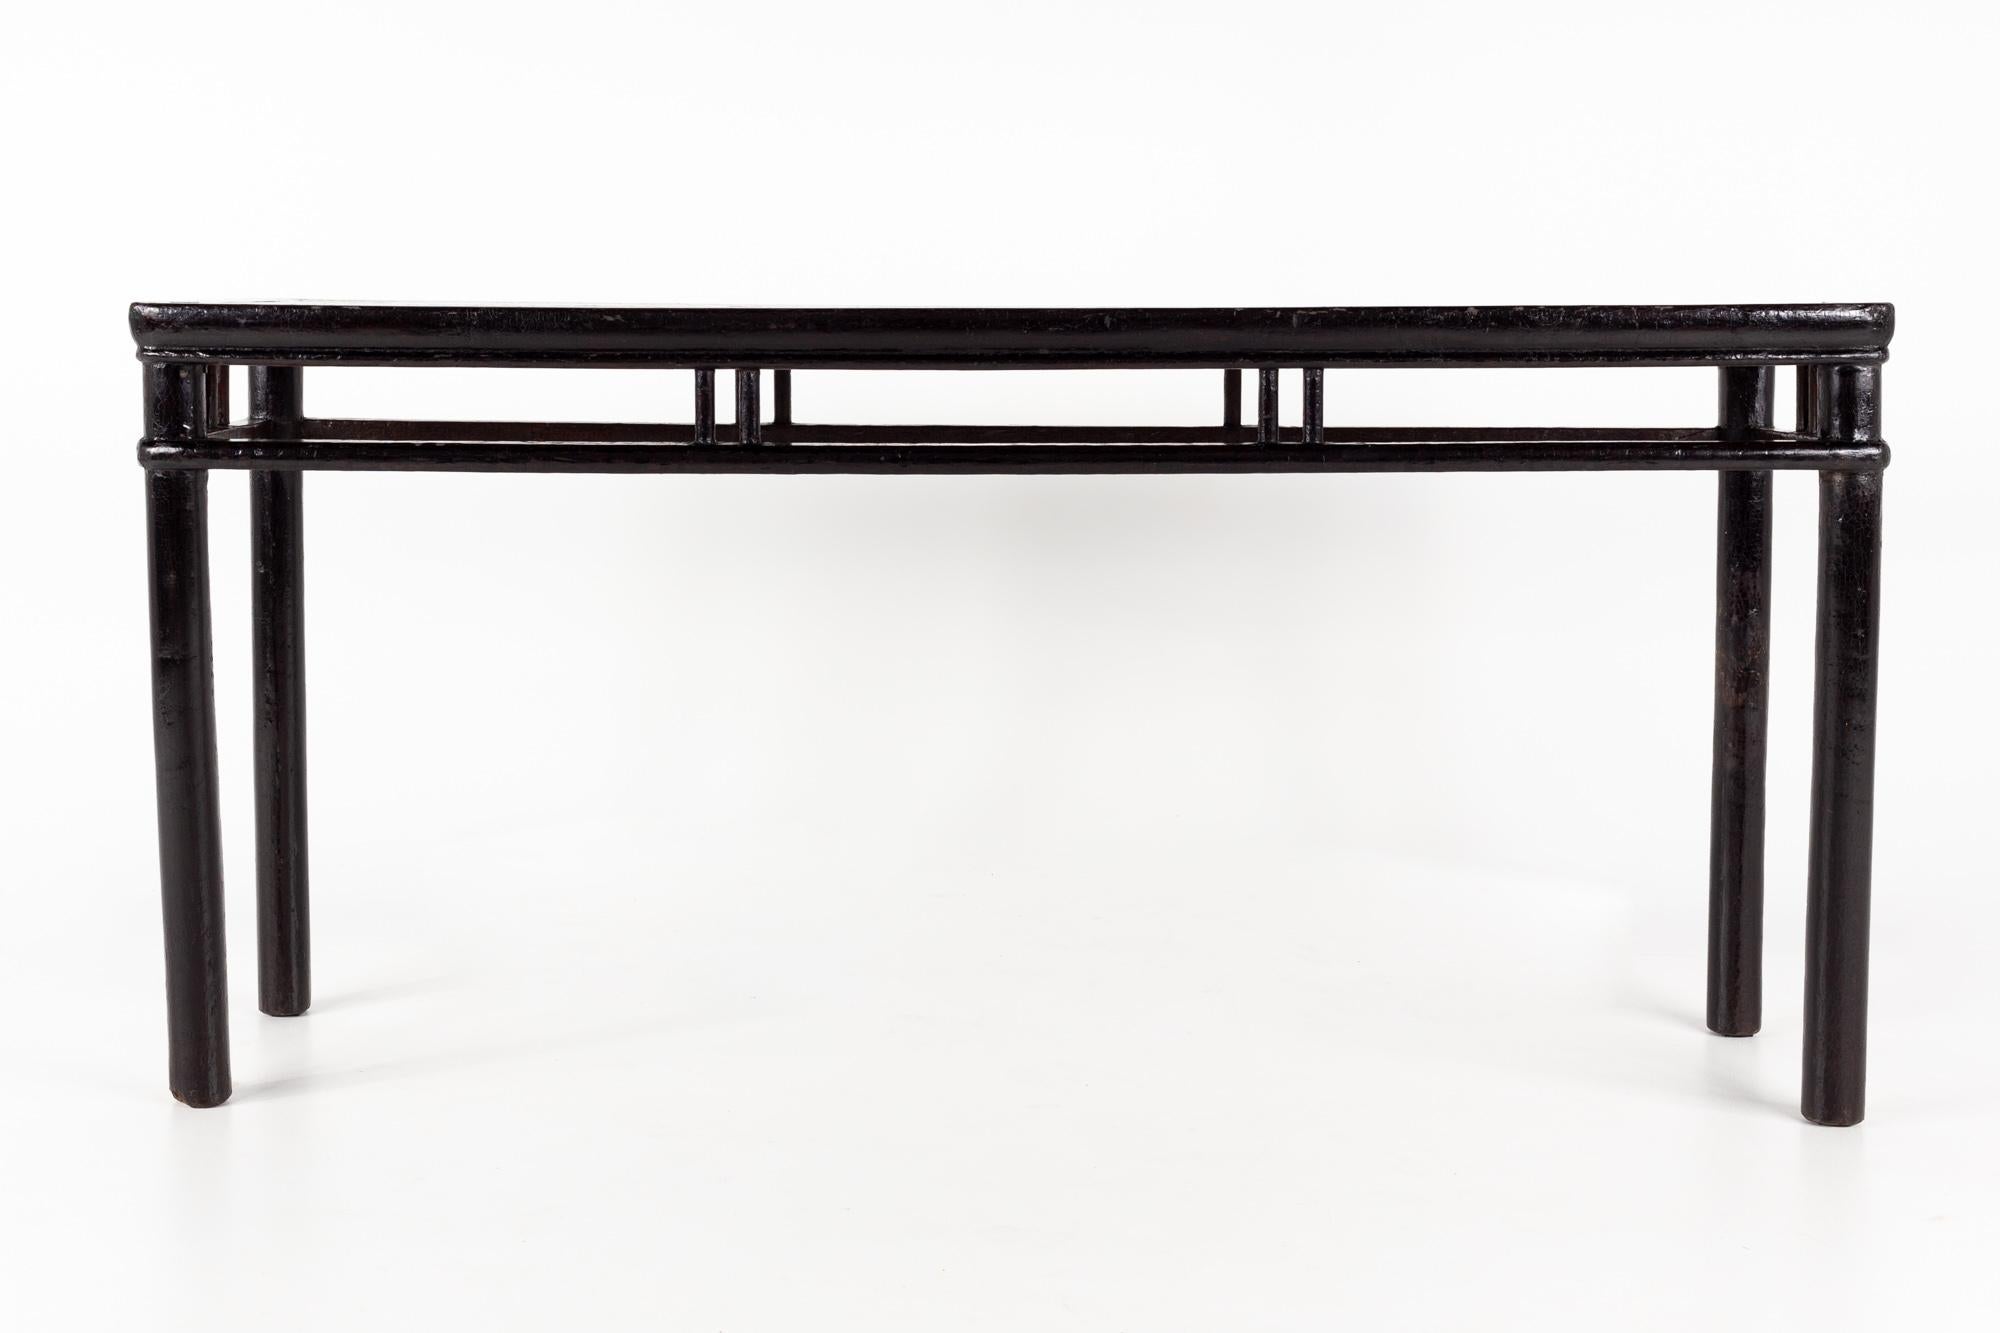 J Robert Scott Asian style console table

This table measures: 70 wide x 18.5 deep x 33.5 high, with a chair clearance of 26.5 inches

This piece is in good vintage condition with some cracks and small chips throughout the black paint. The legs